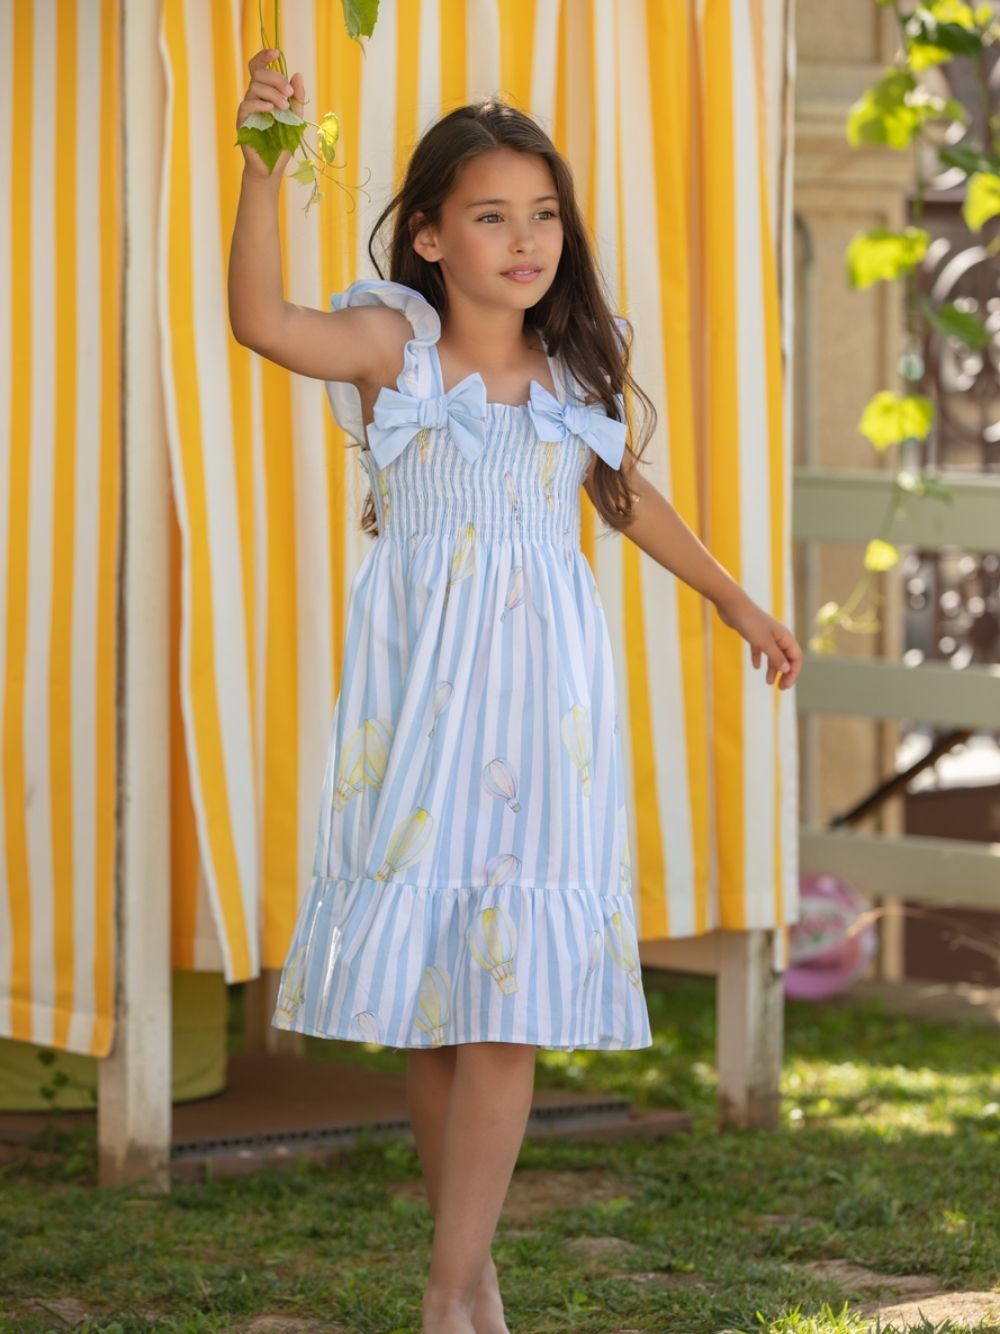 Girls dress with blue stripes and air balloons print